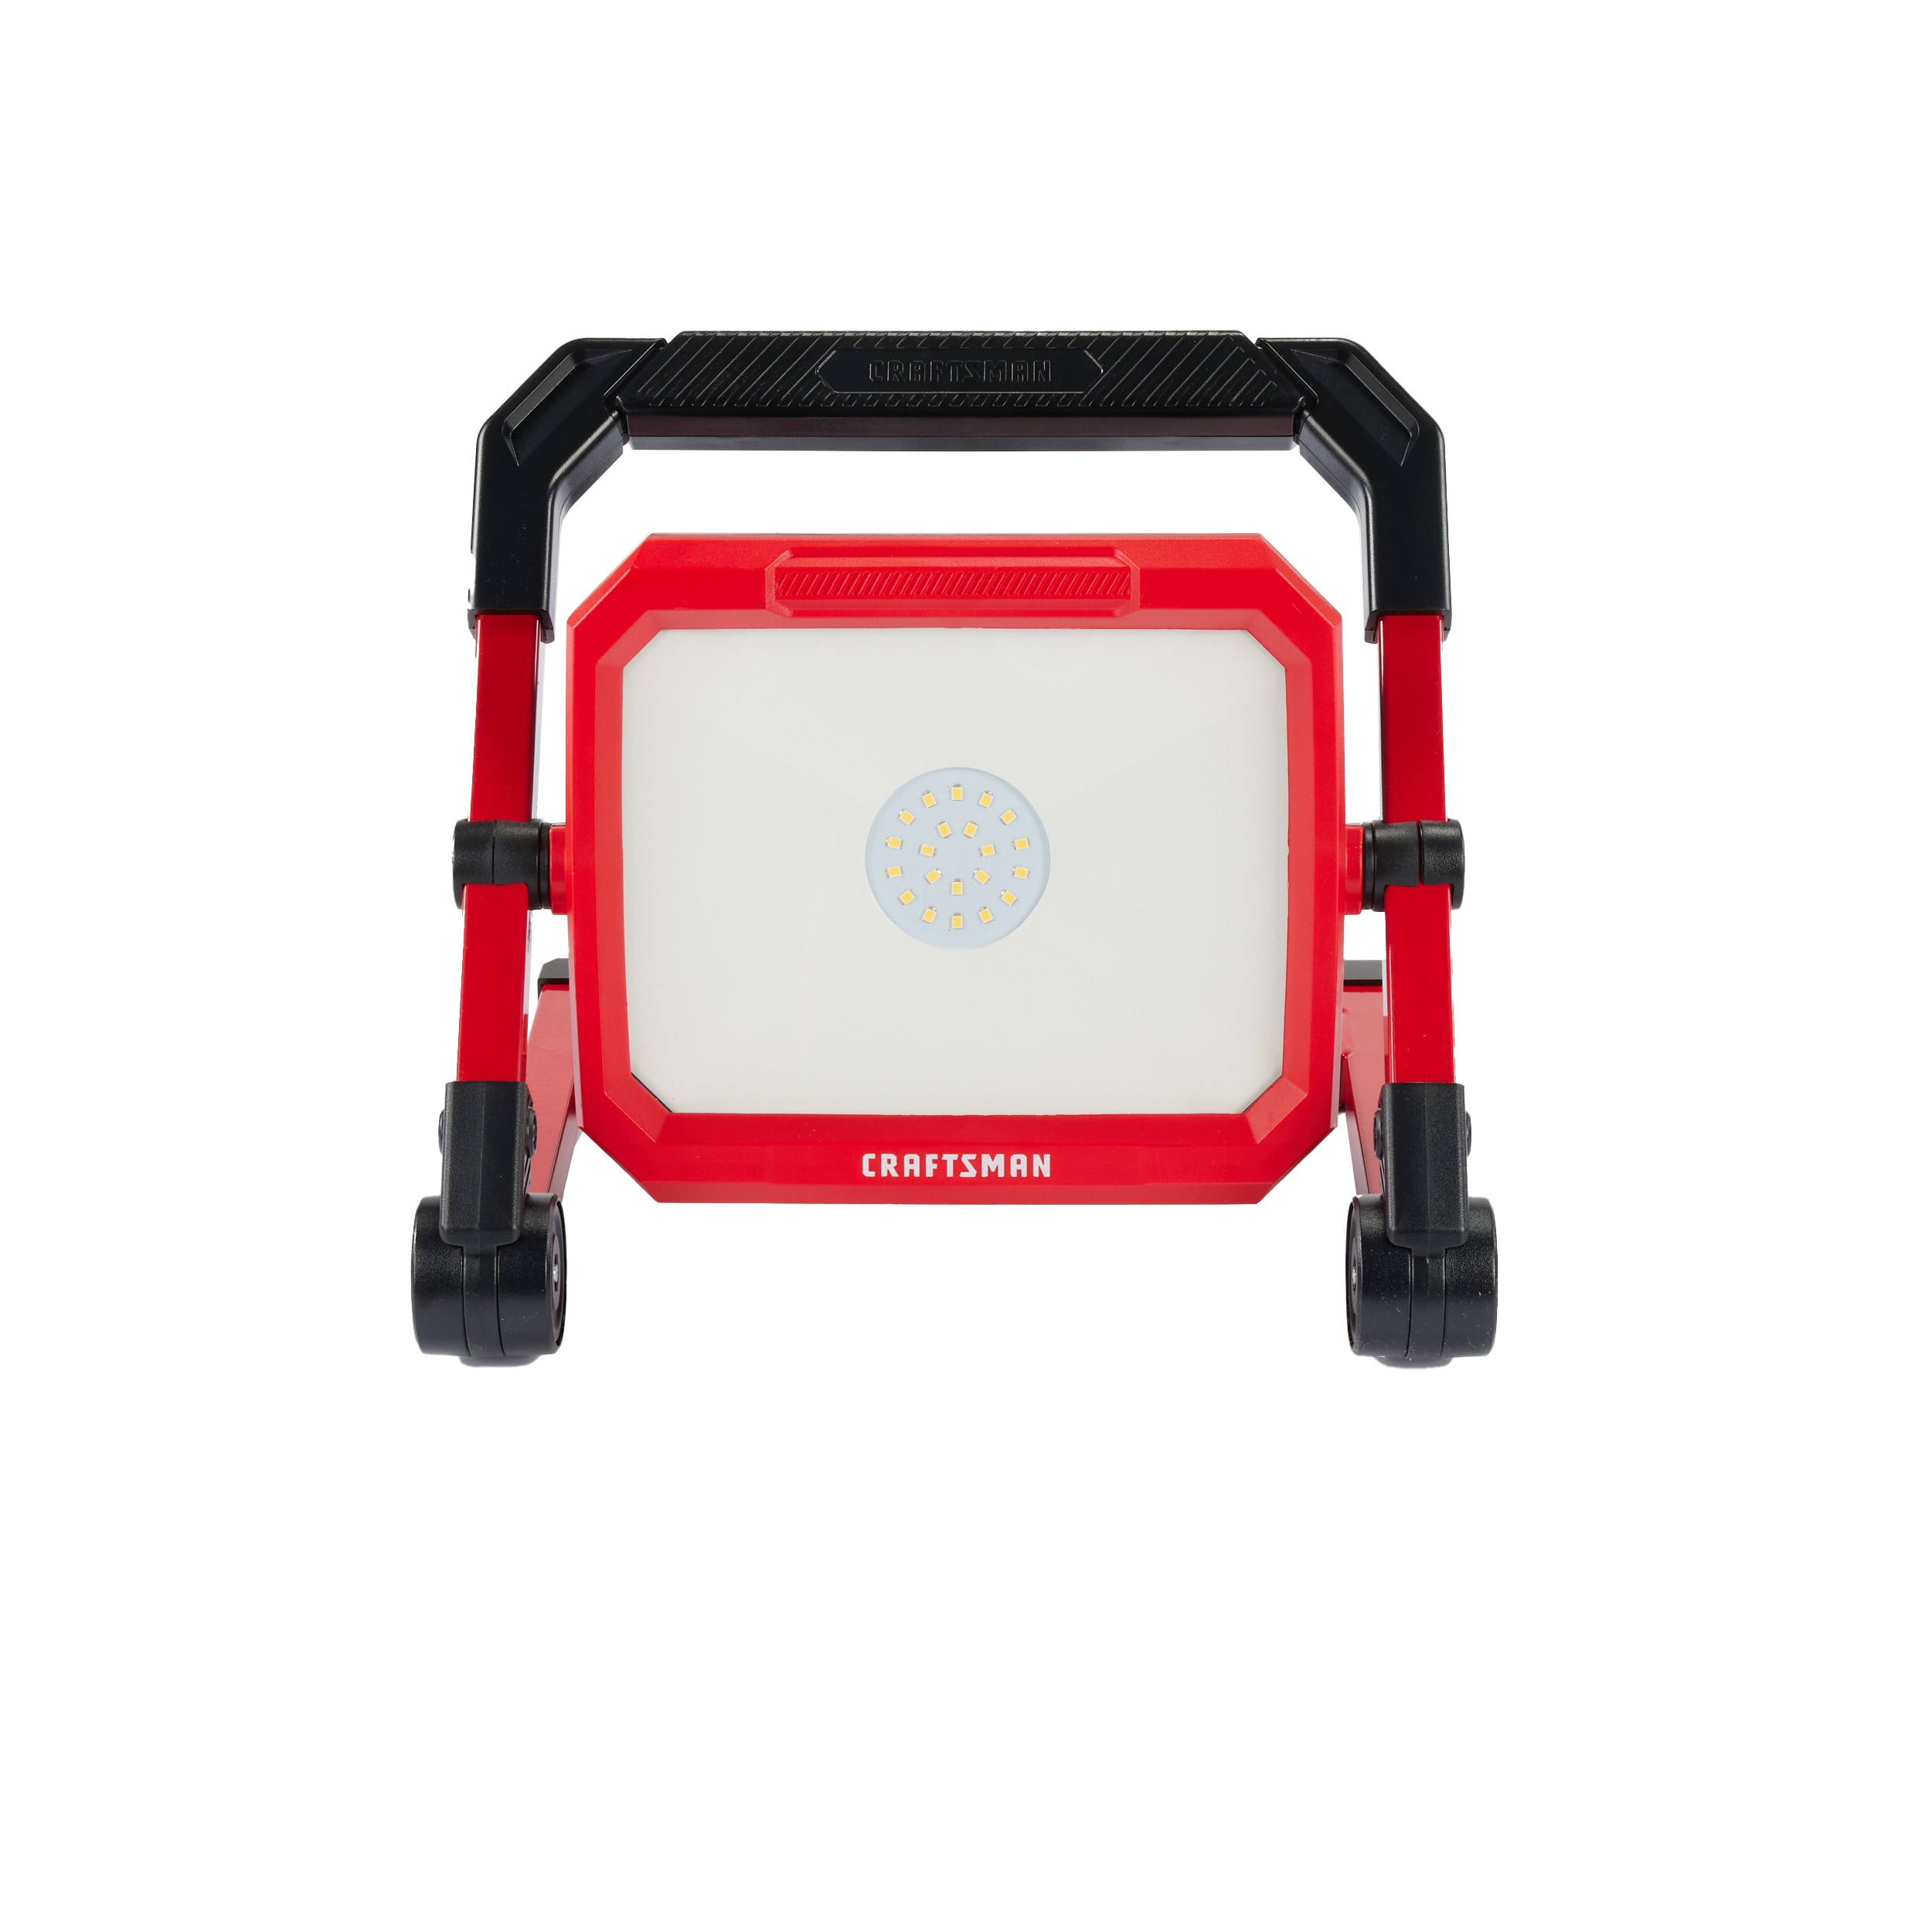 CRAFTSMAN 9000-Lumen LED Red Plug-in Portable Work Light in the